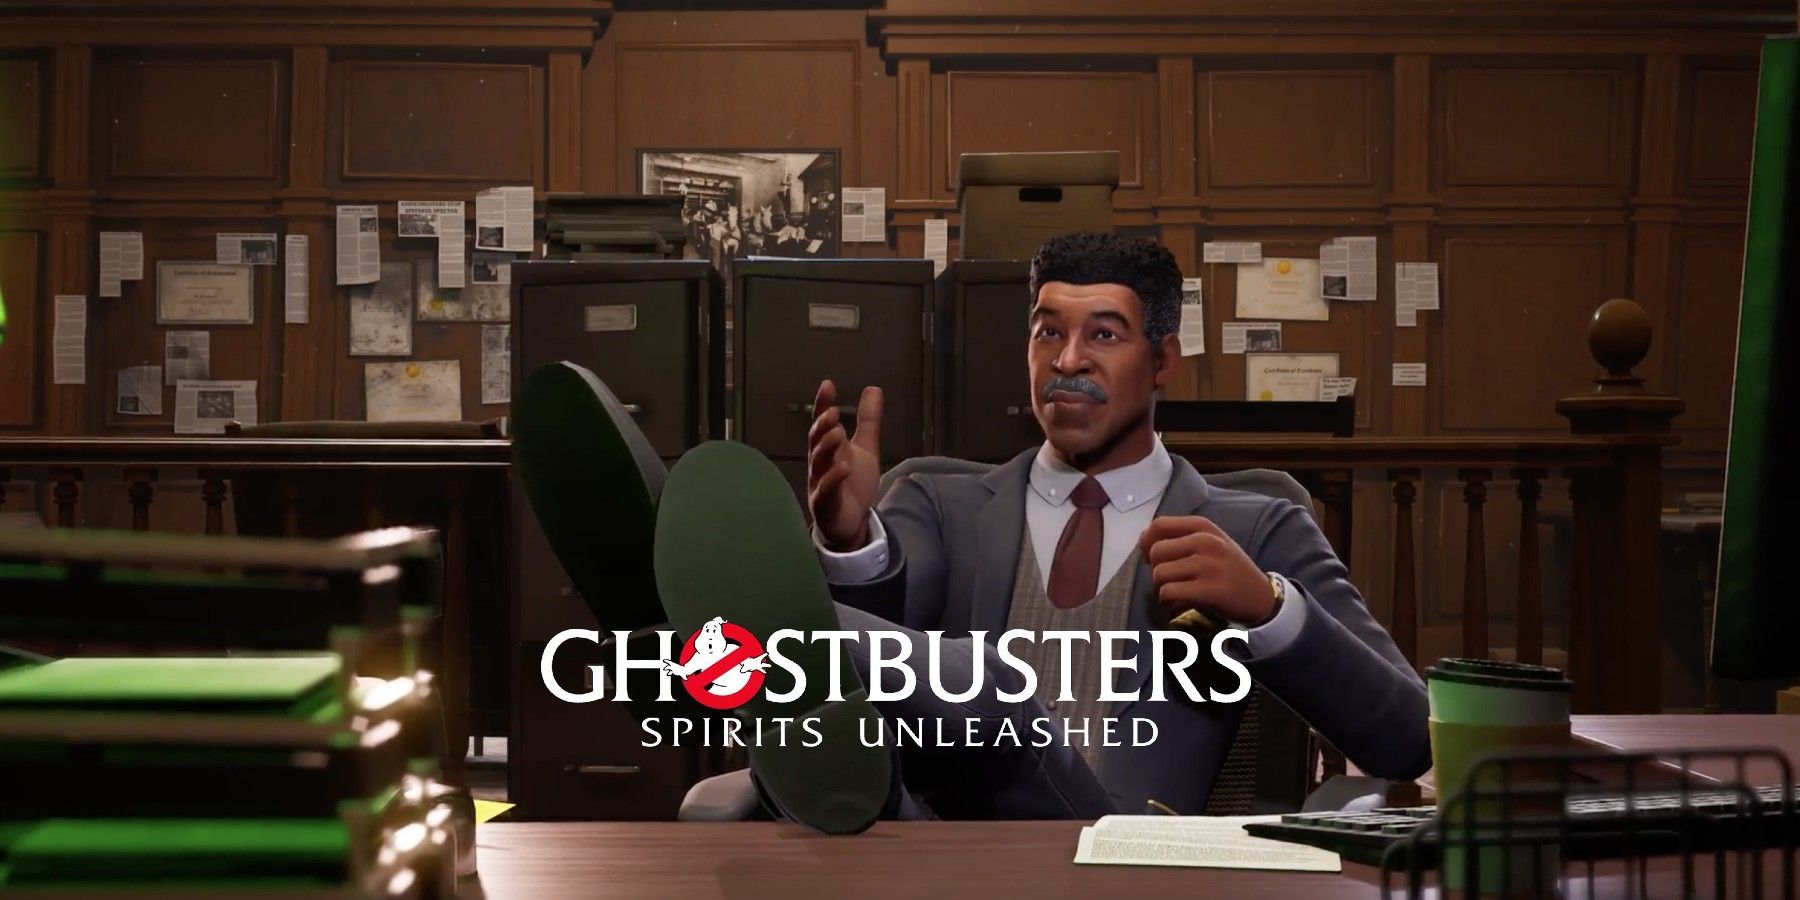 Tips, tricks, and strategies for Ghostbusters in Ghostbusters: Spirits Unleashed